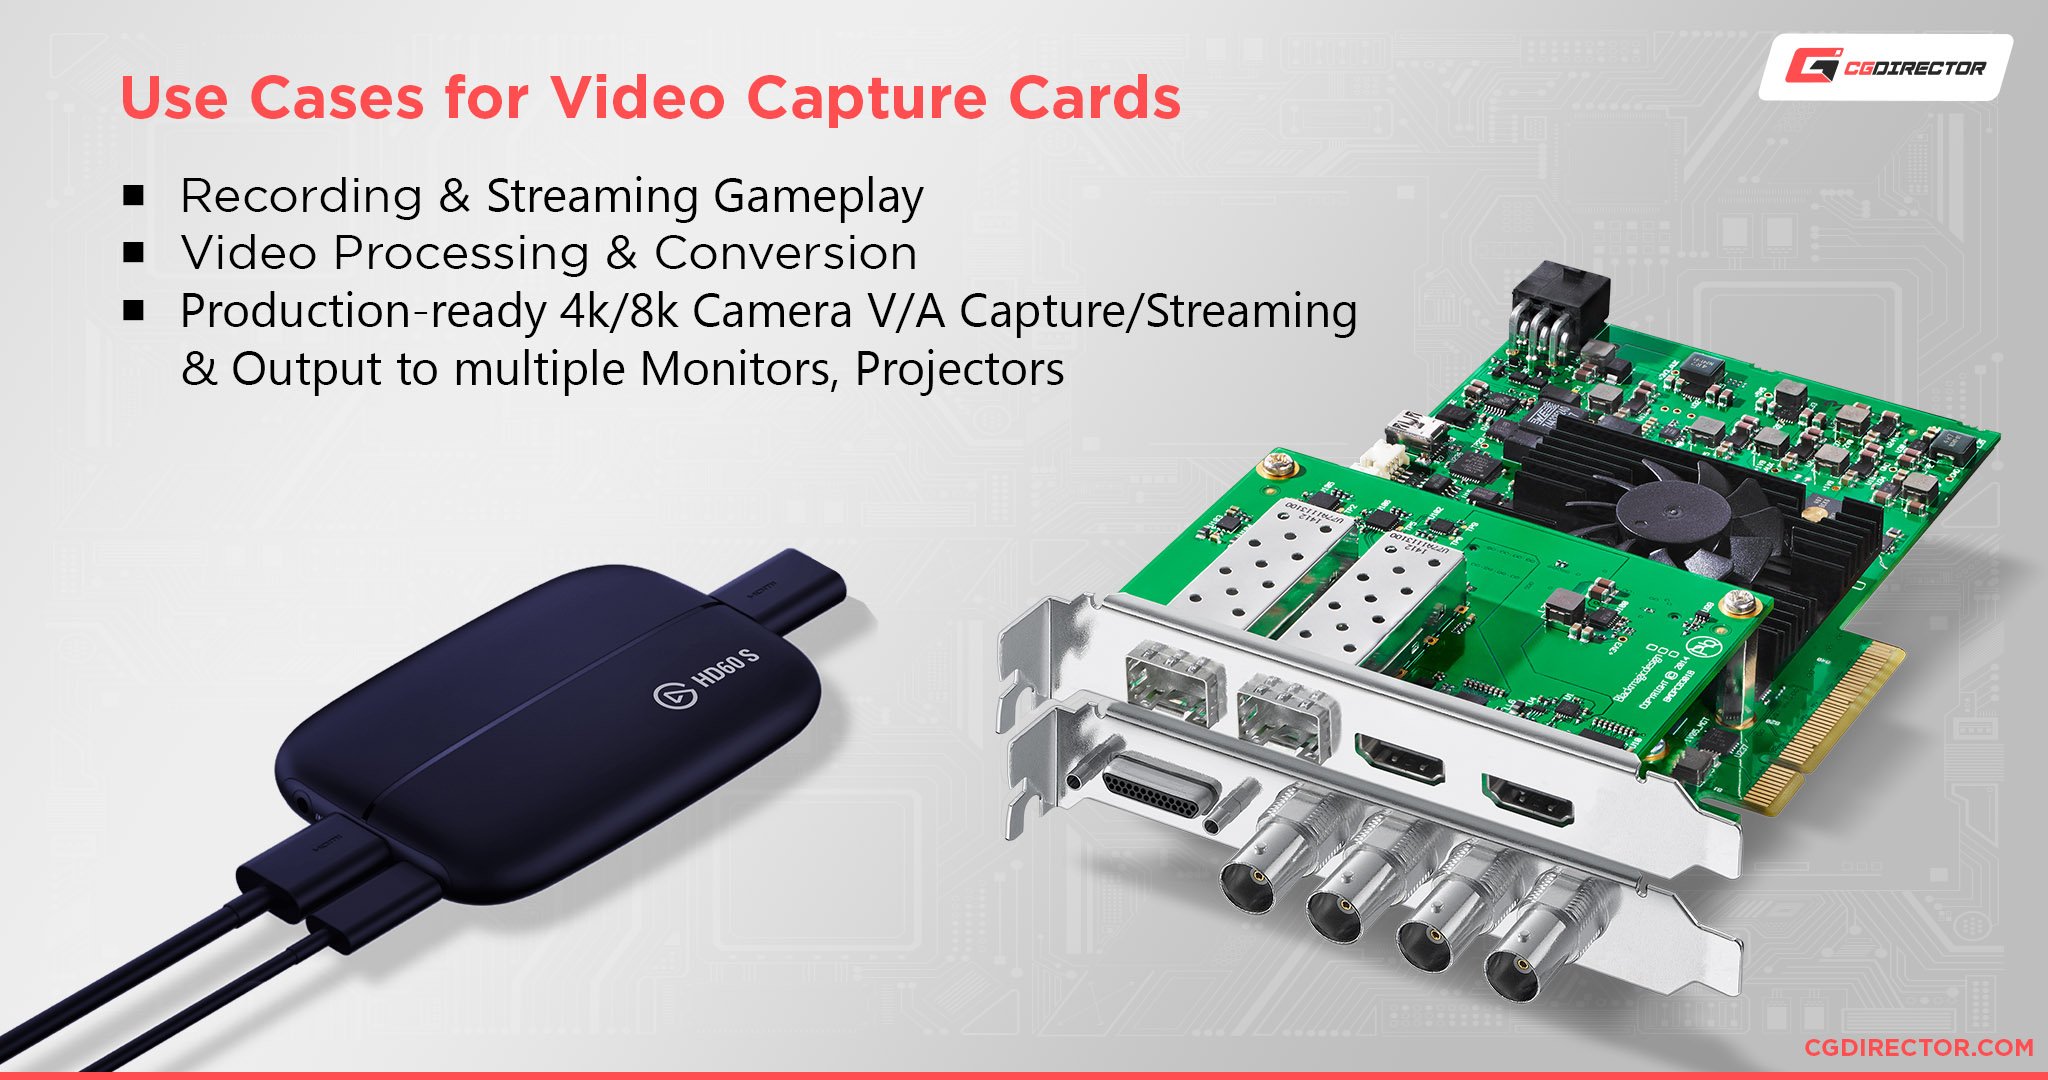 Use Cases for Video Capture Cards